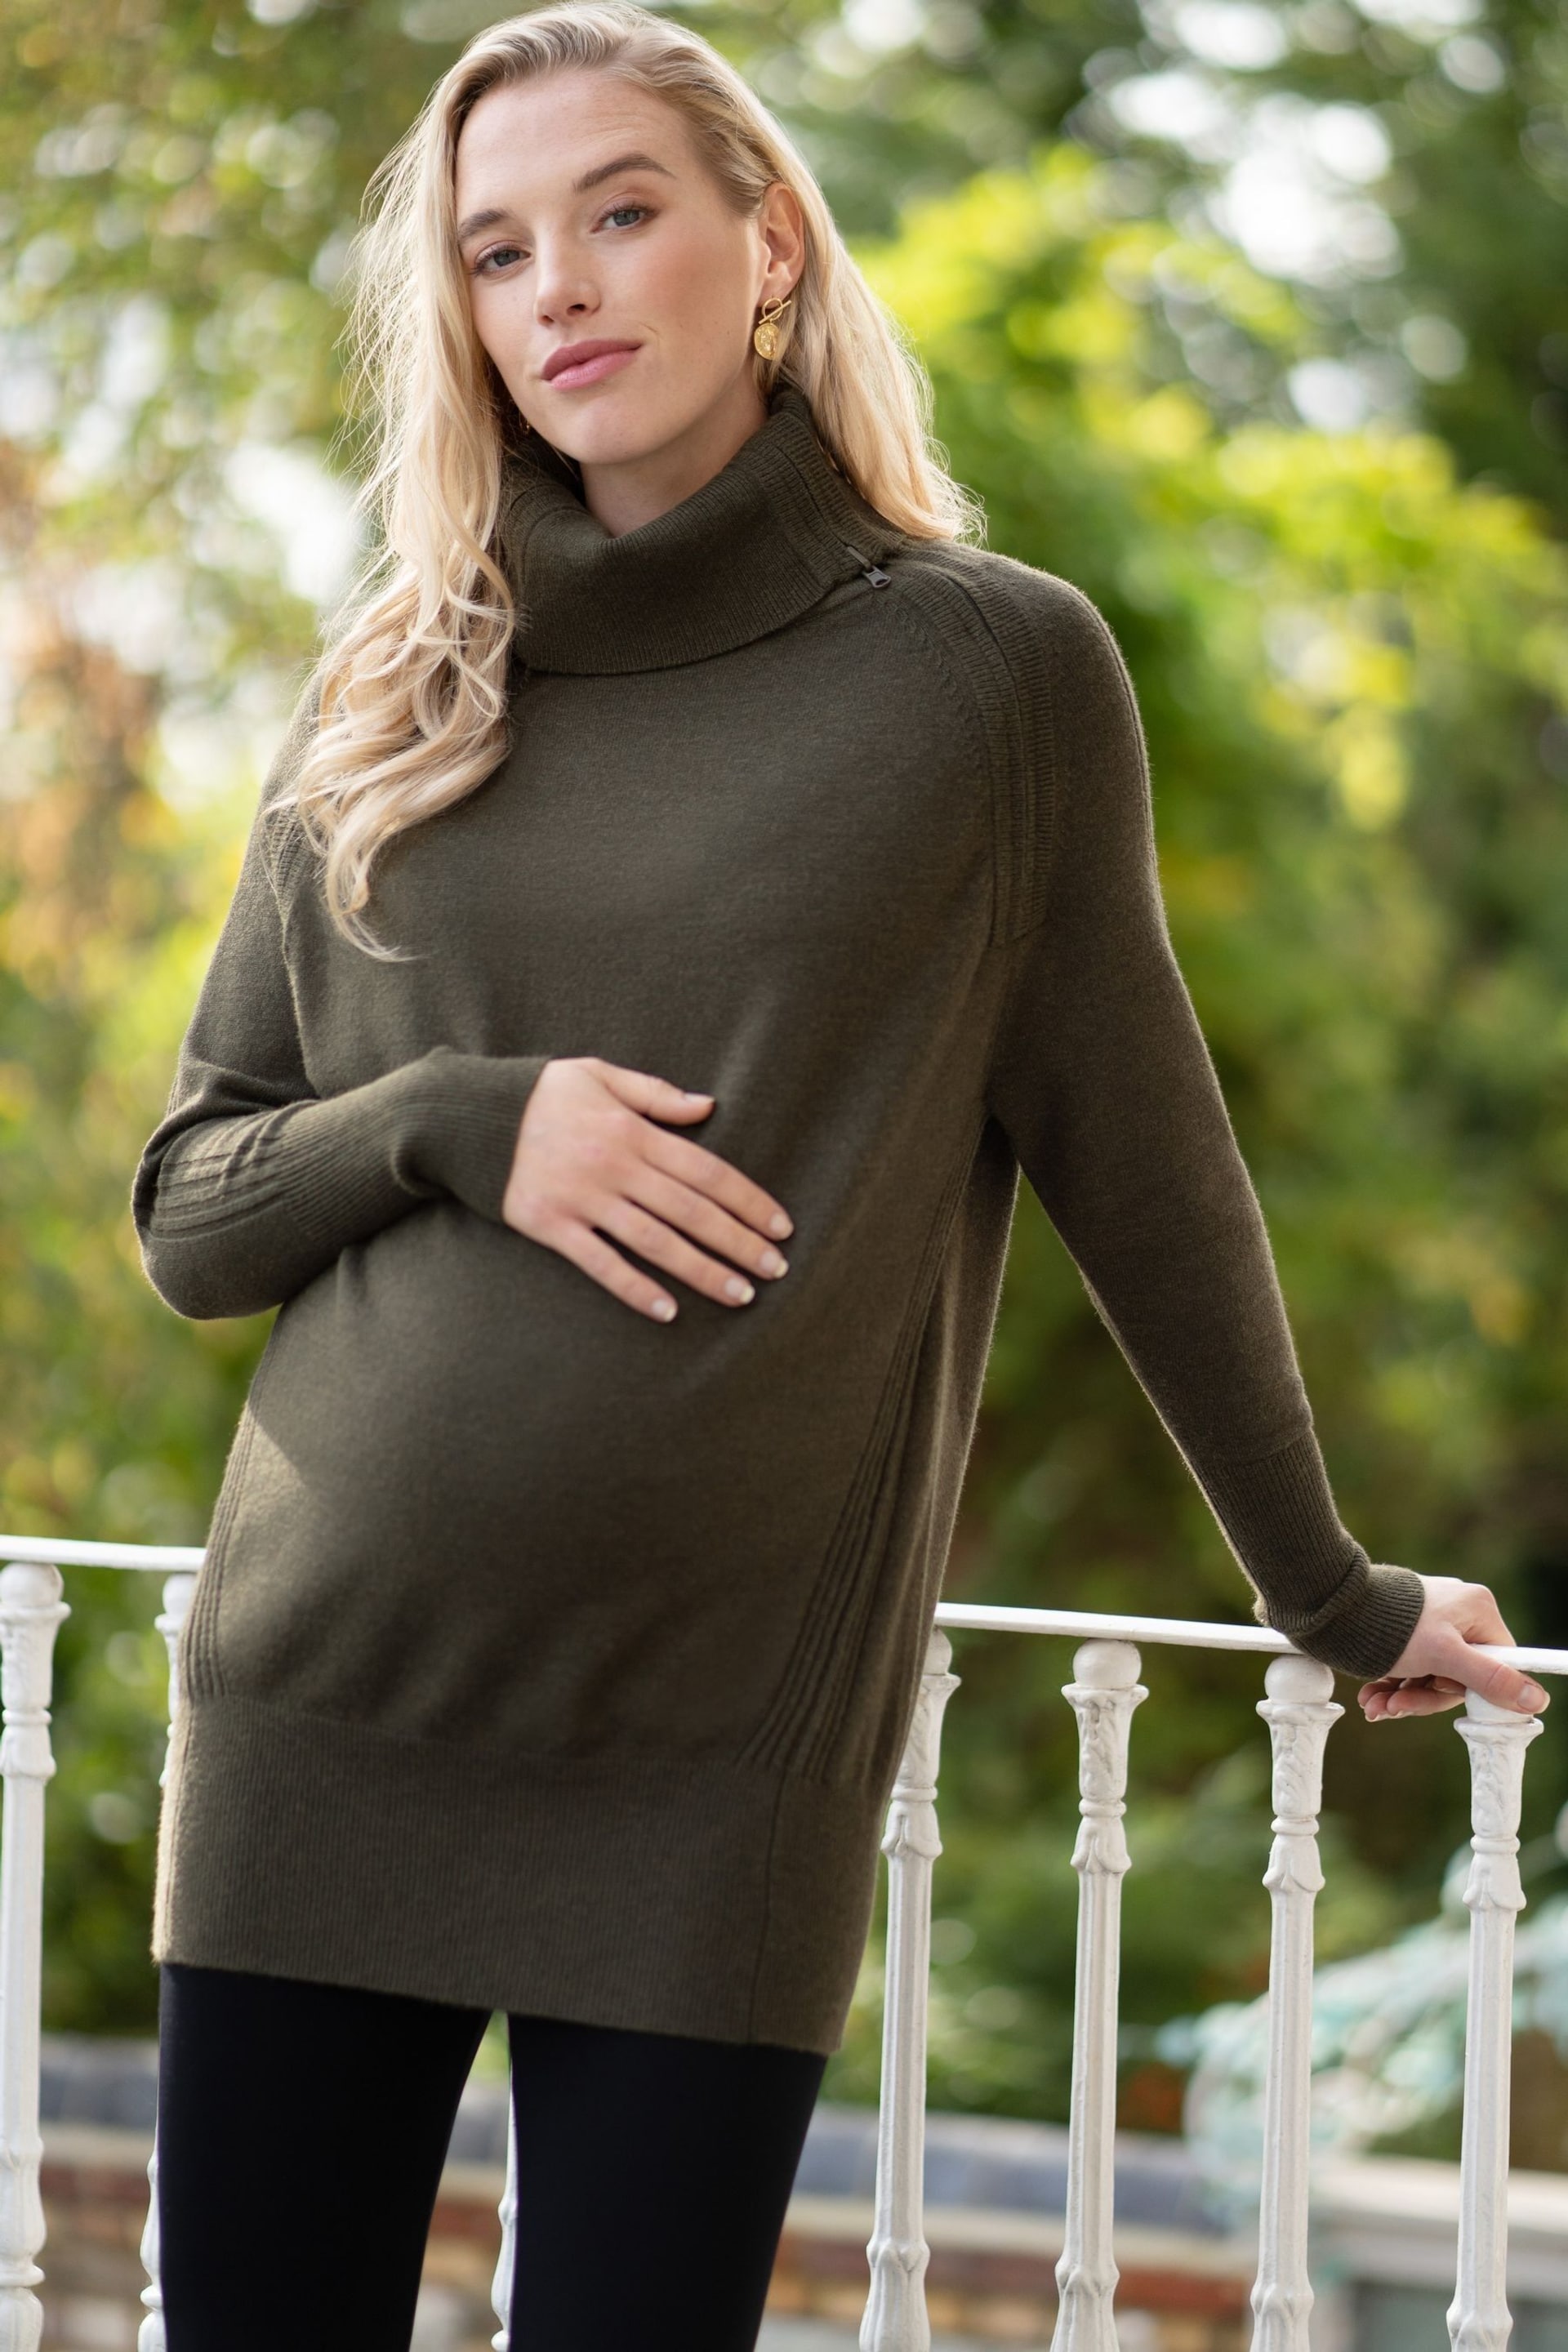 Seraphine Green Maternity And Nursing Roll Neck Jumper - Image 1 of 5